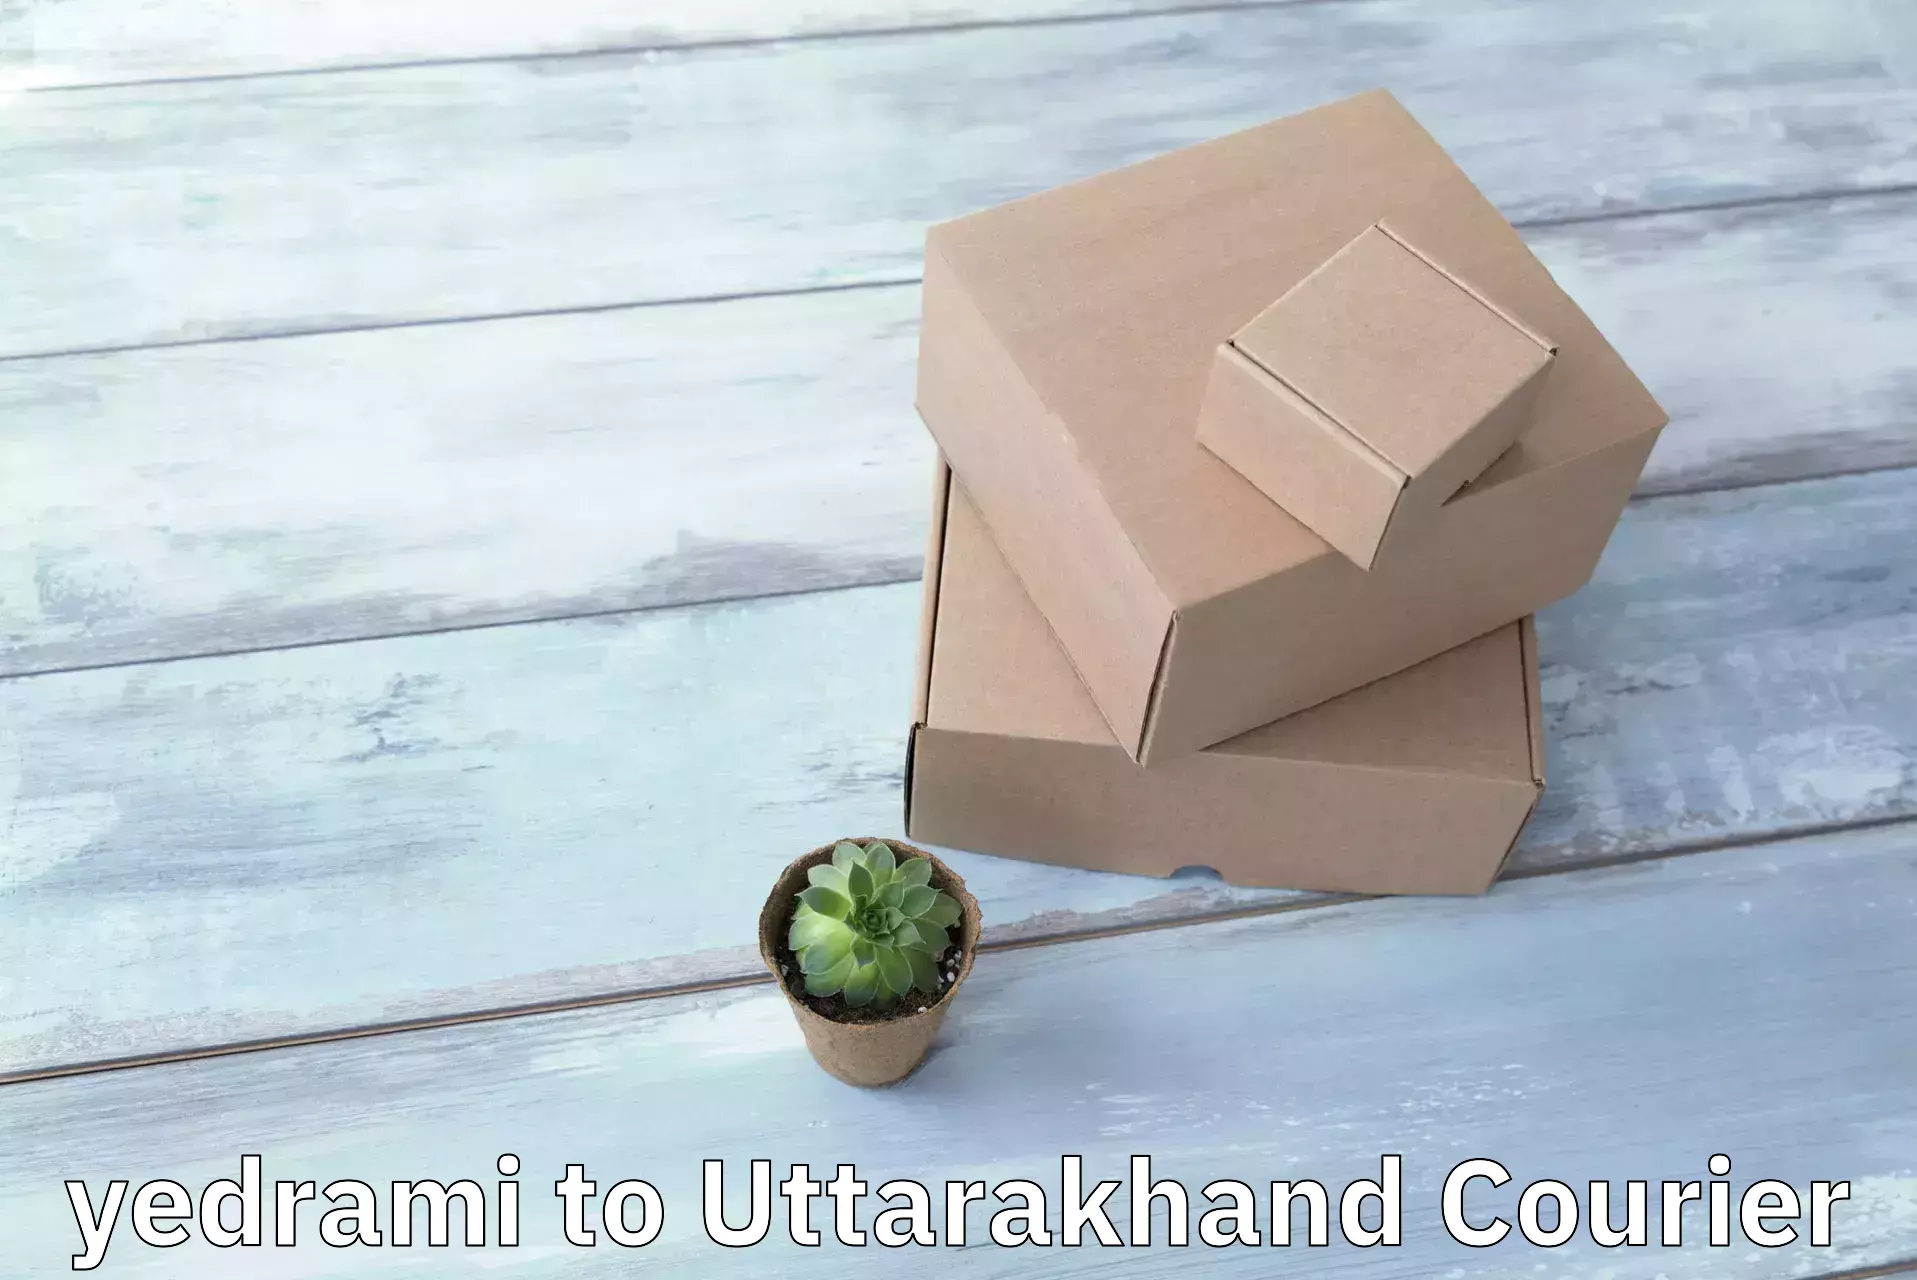 State-of-the-art courier technology yedrami to Uttarkashi